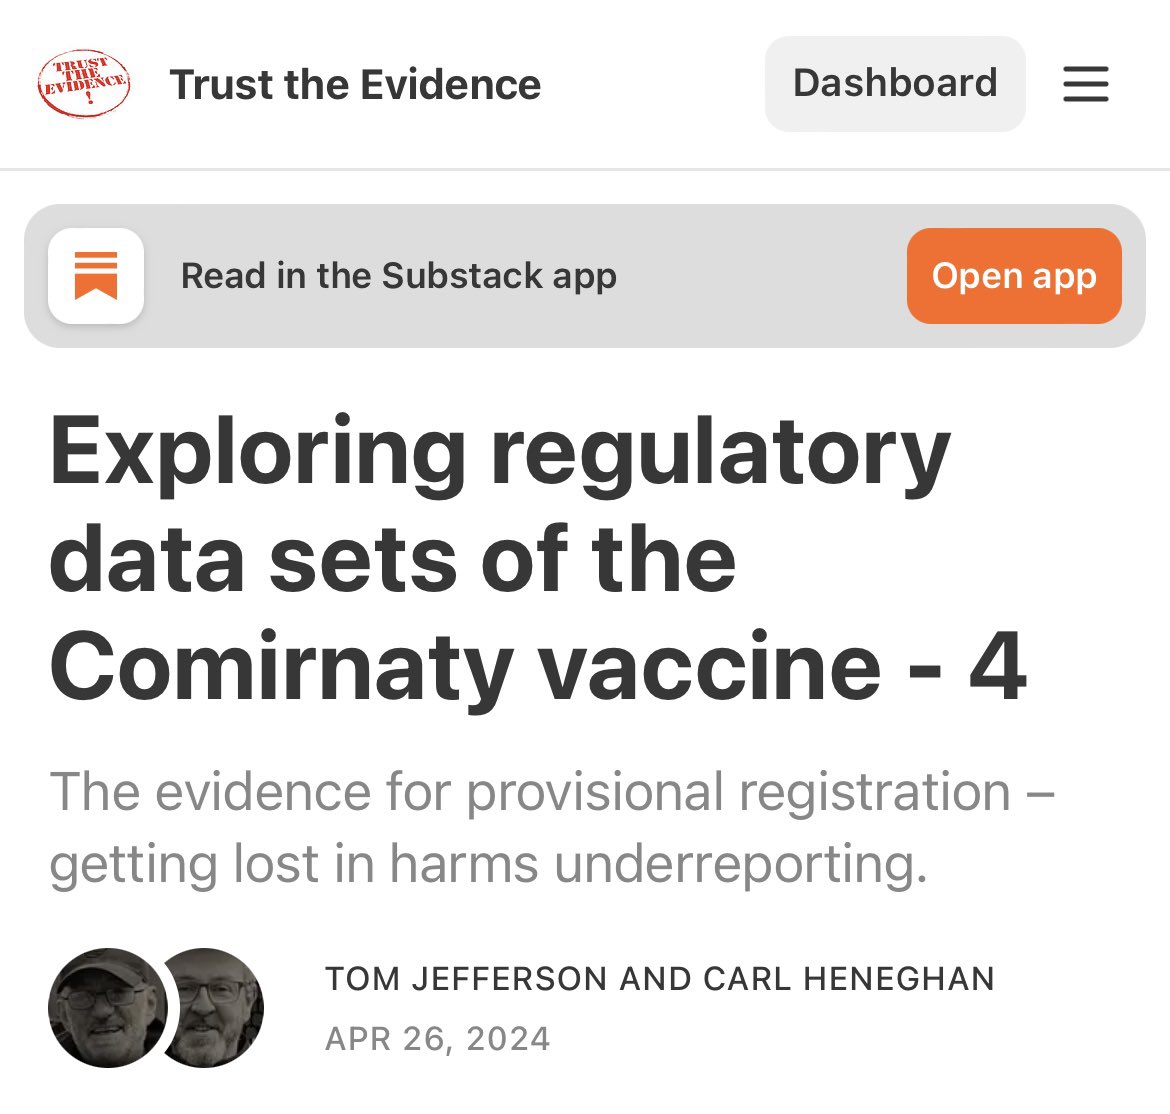 Exploring regulatory data sets of the Comirnaty vaccine - 4 The evidence for provisional registration – getting lost in harms underreporting. trusttheevidence.substack.com/p/exploring-re…